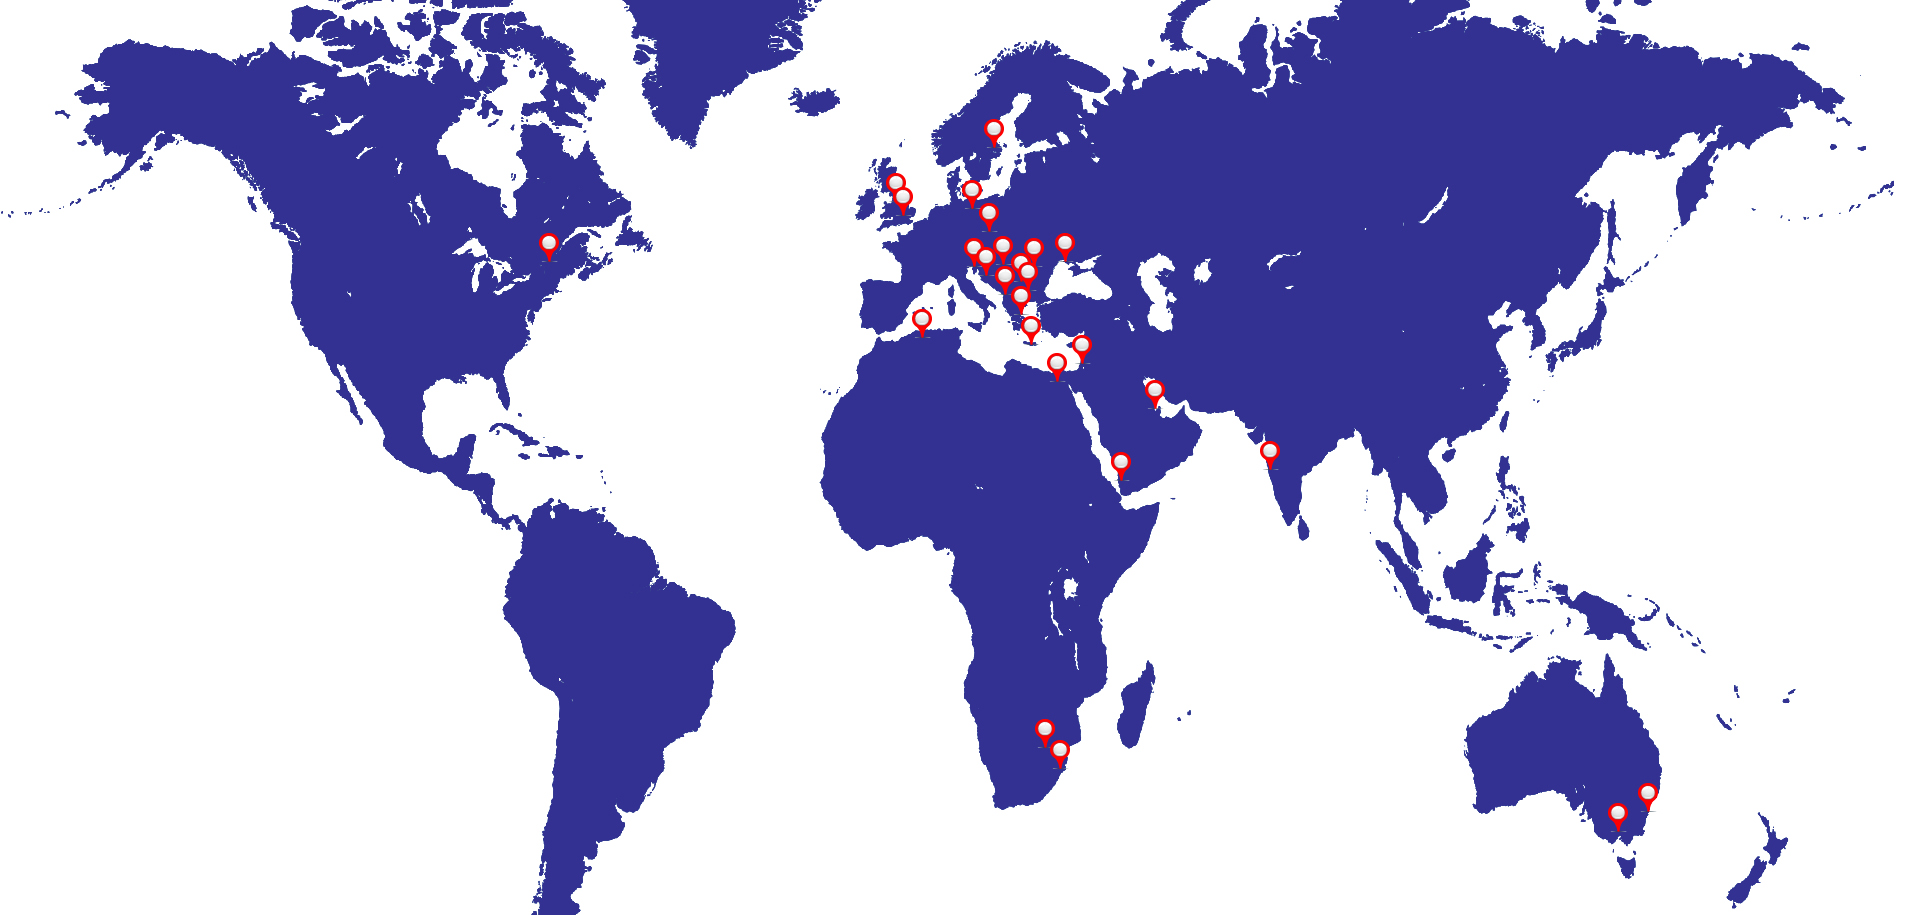 Clients of Elin S.A. all over the world